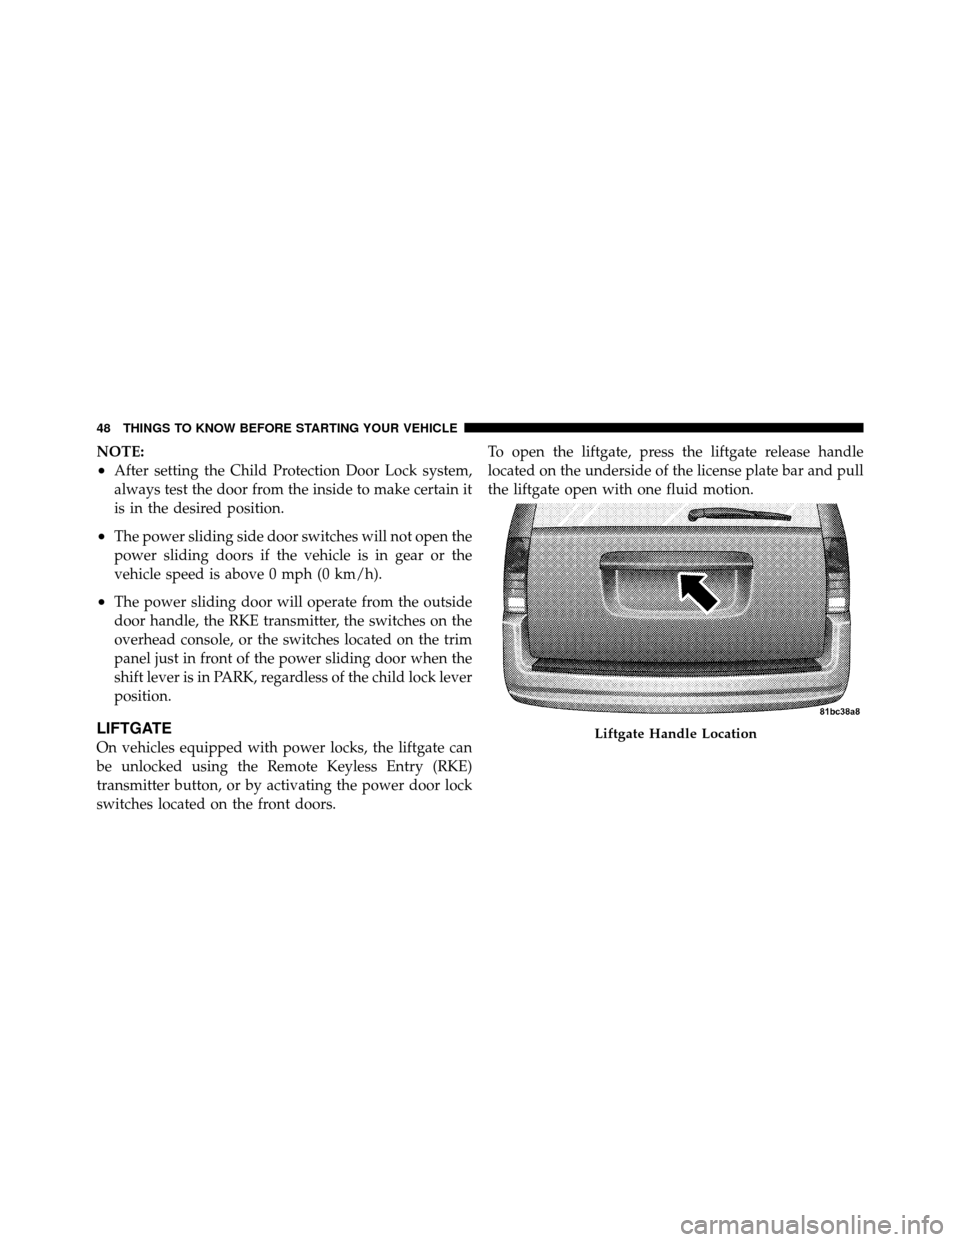 CHRYSLER TOWN AND COUNTRY 2010 5.G Owners Manual NOTE:
•After setting the Child Protection Door Lock system,
always test the door from the inside to make certain it
is in the desired position.
•The power sliding side door switches will not open 